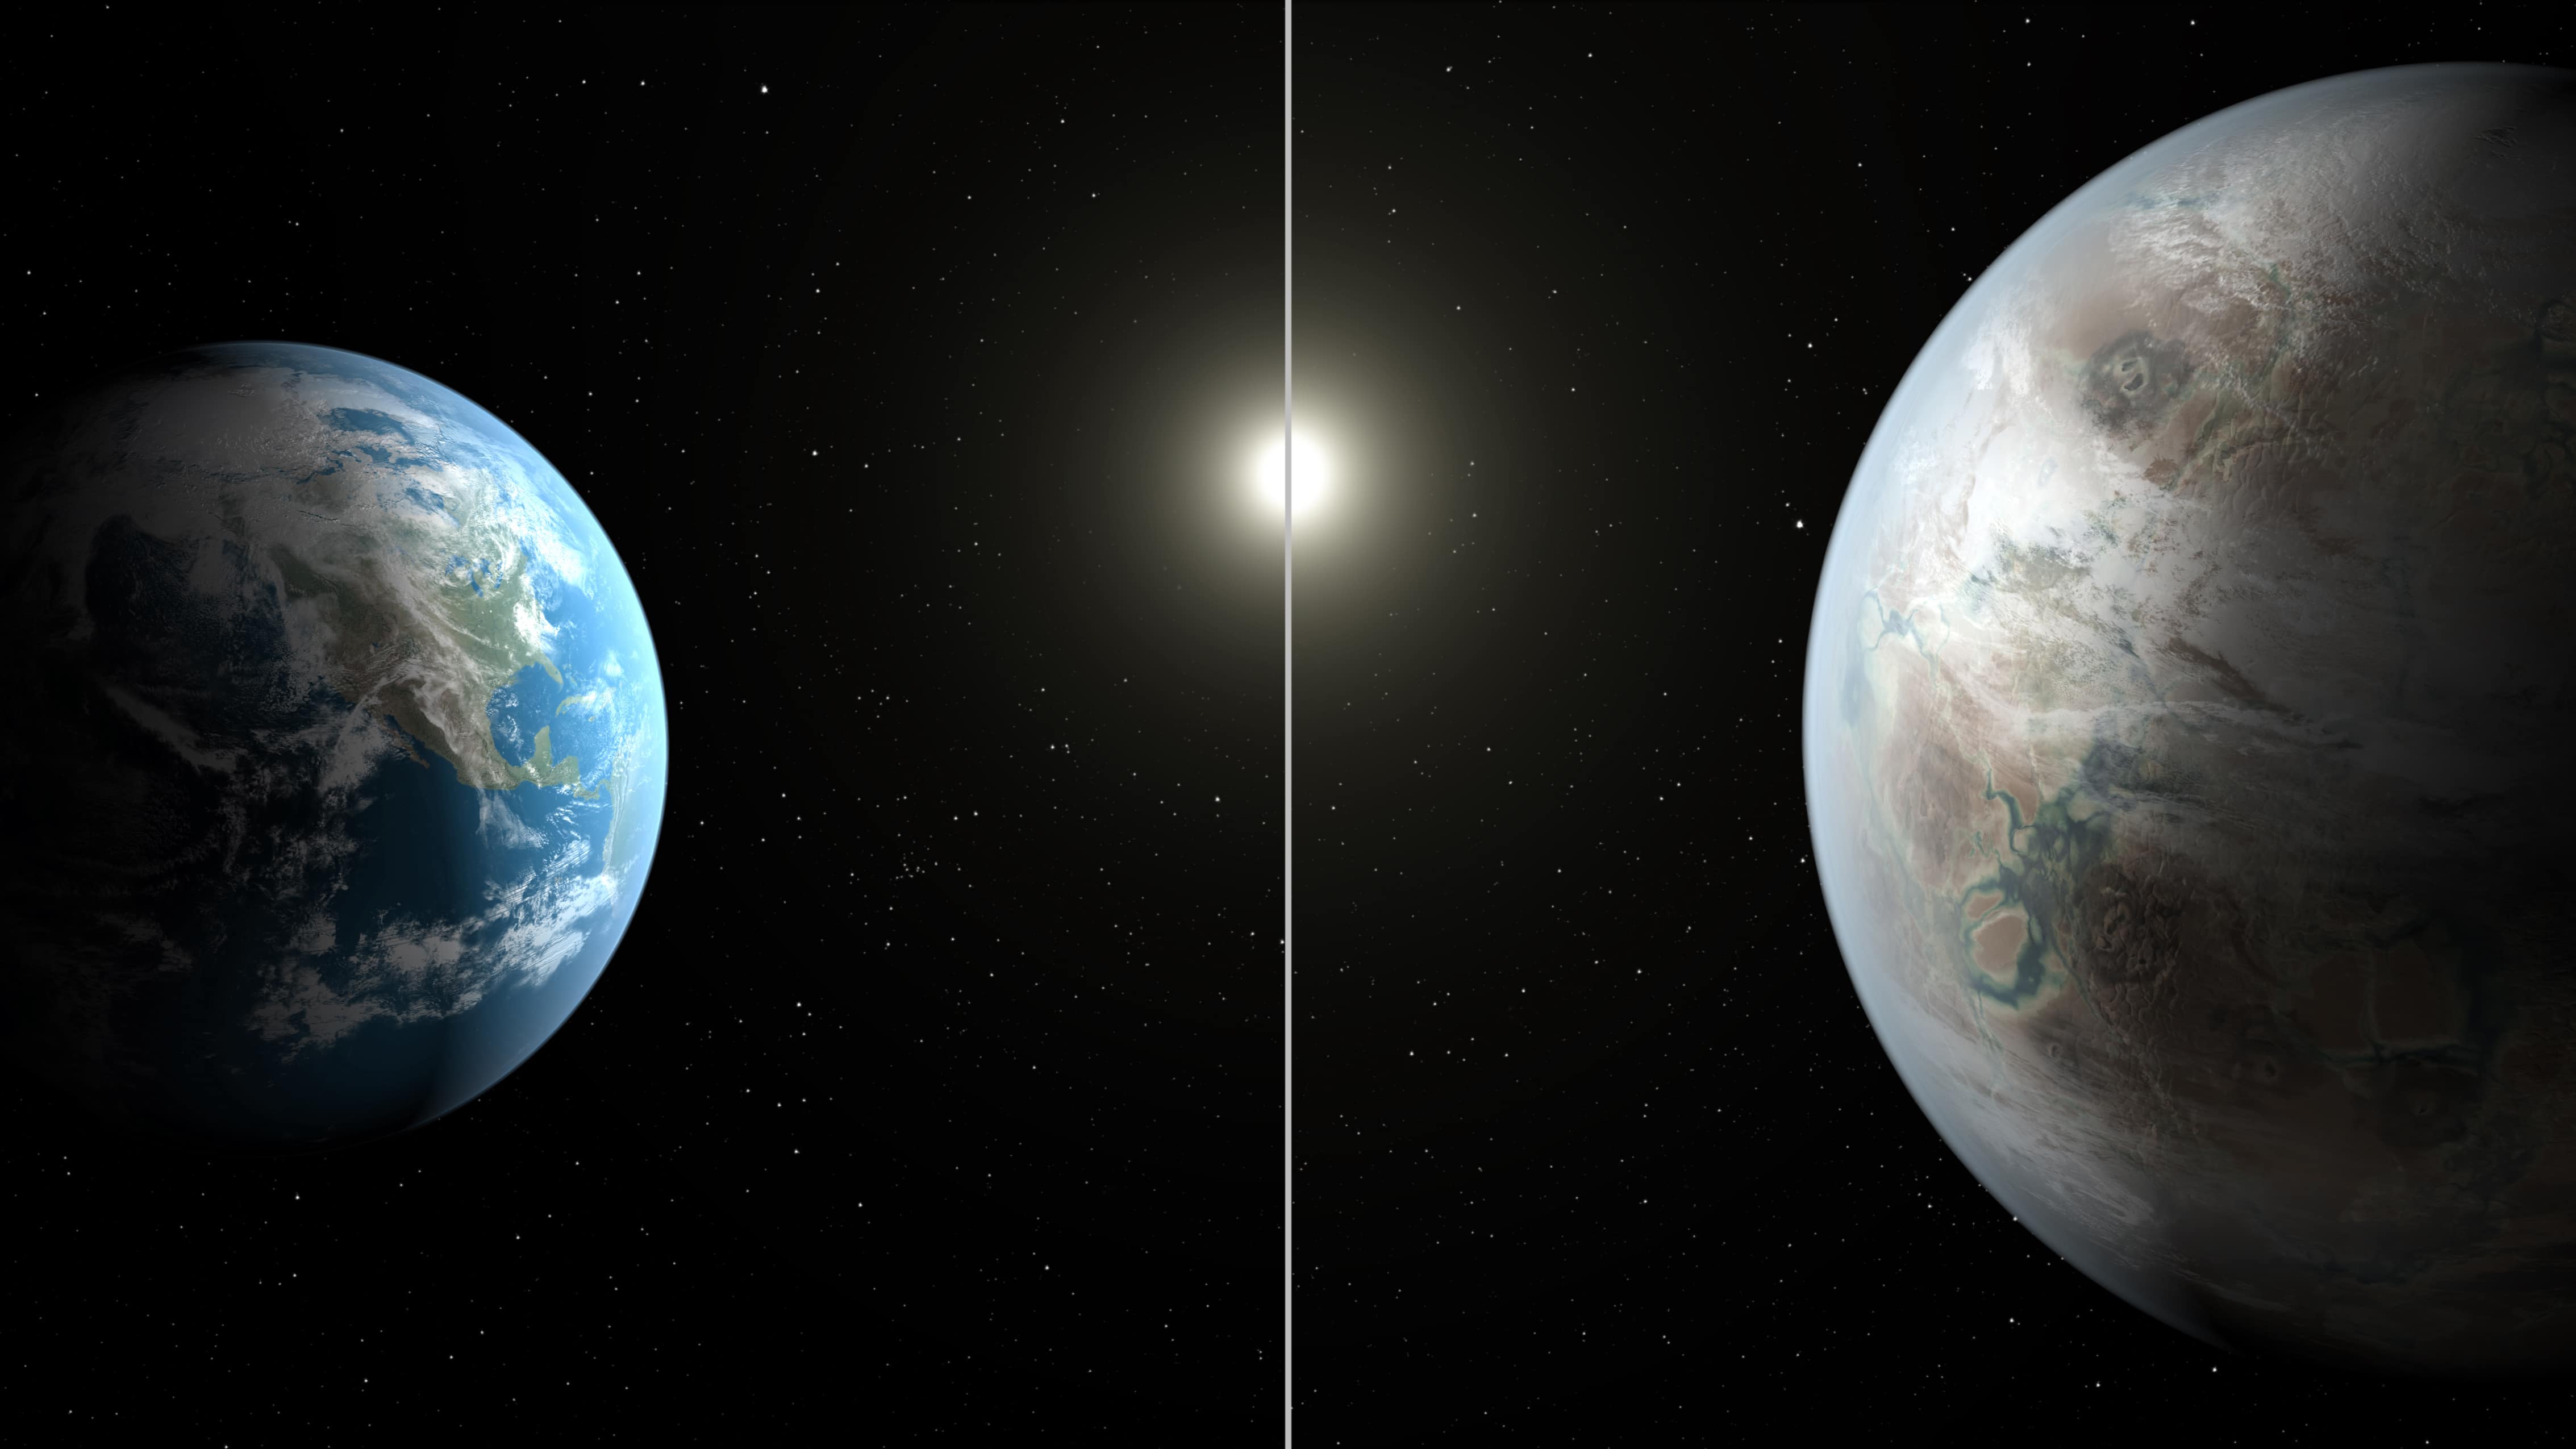 This NASA artist's concept obtained July 23, 2015 compares Earth (left) to the new planet, called Kepler-452b.